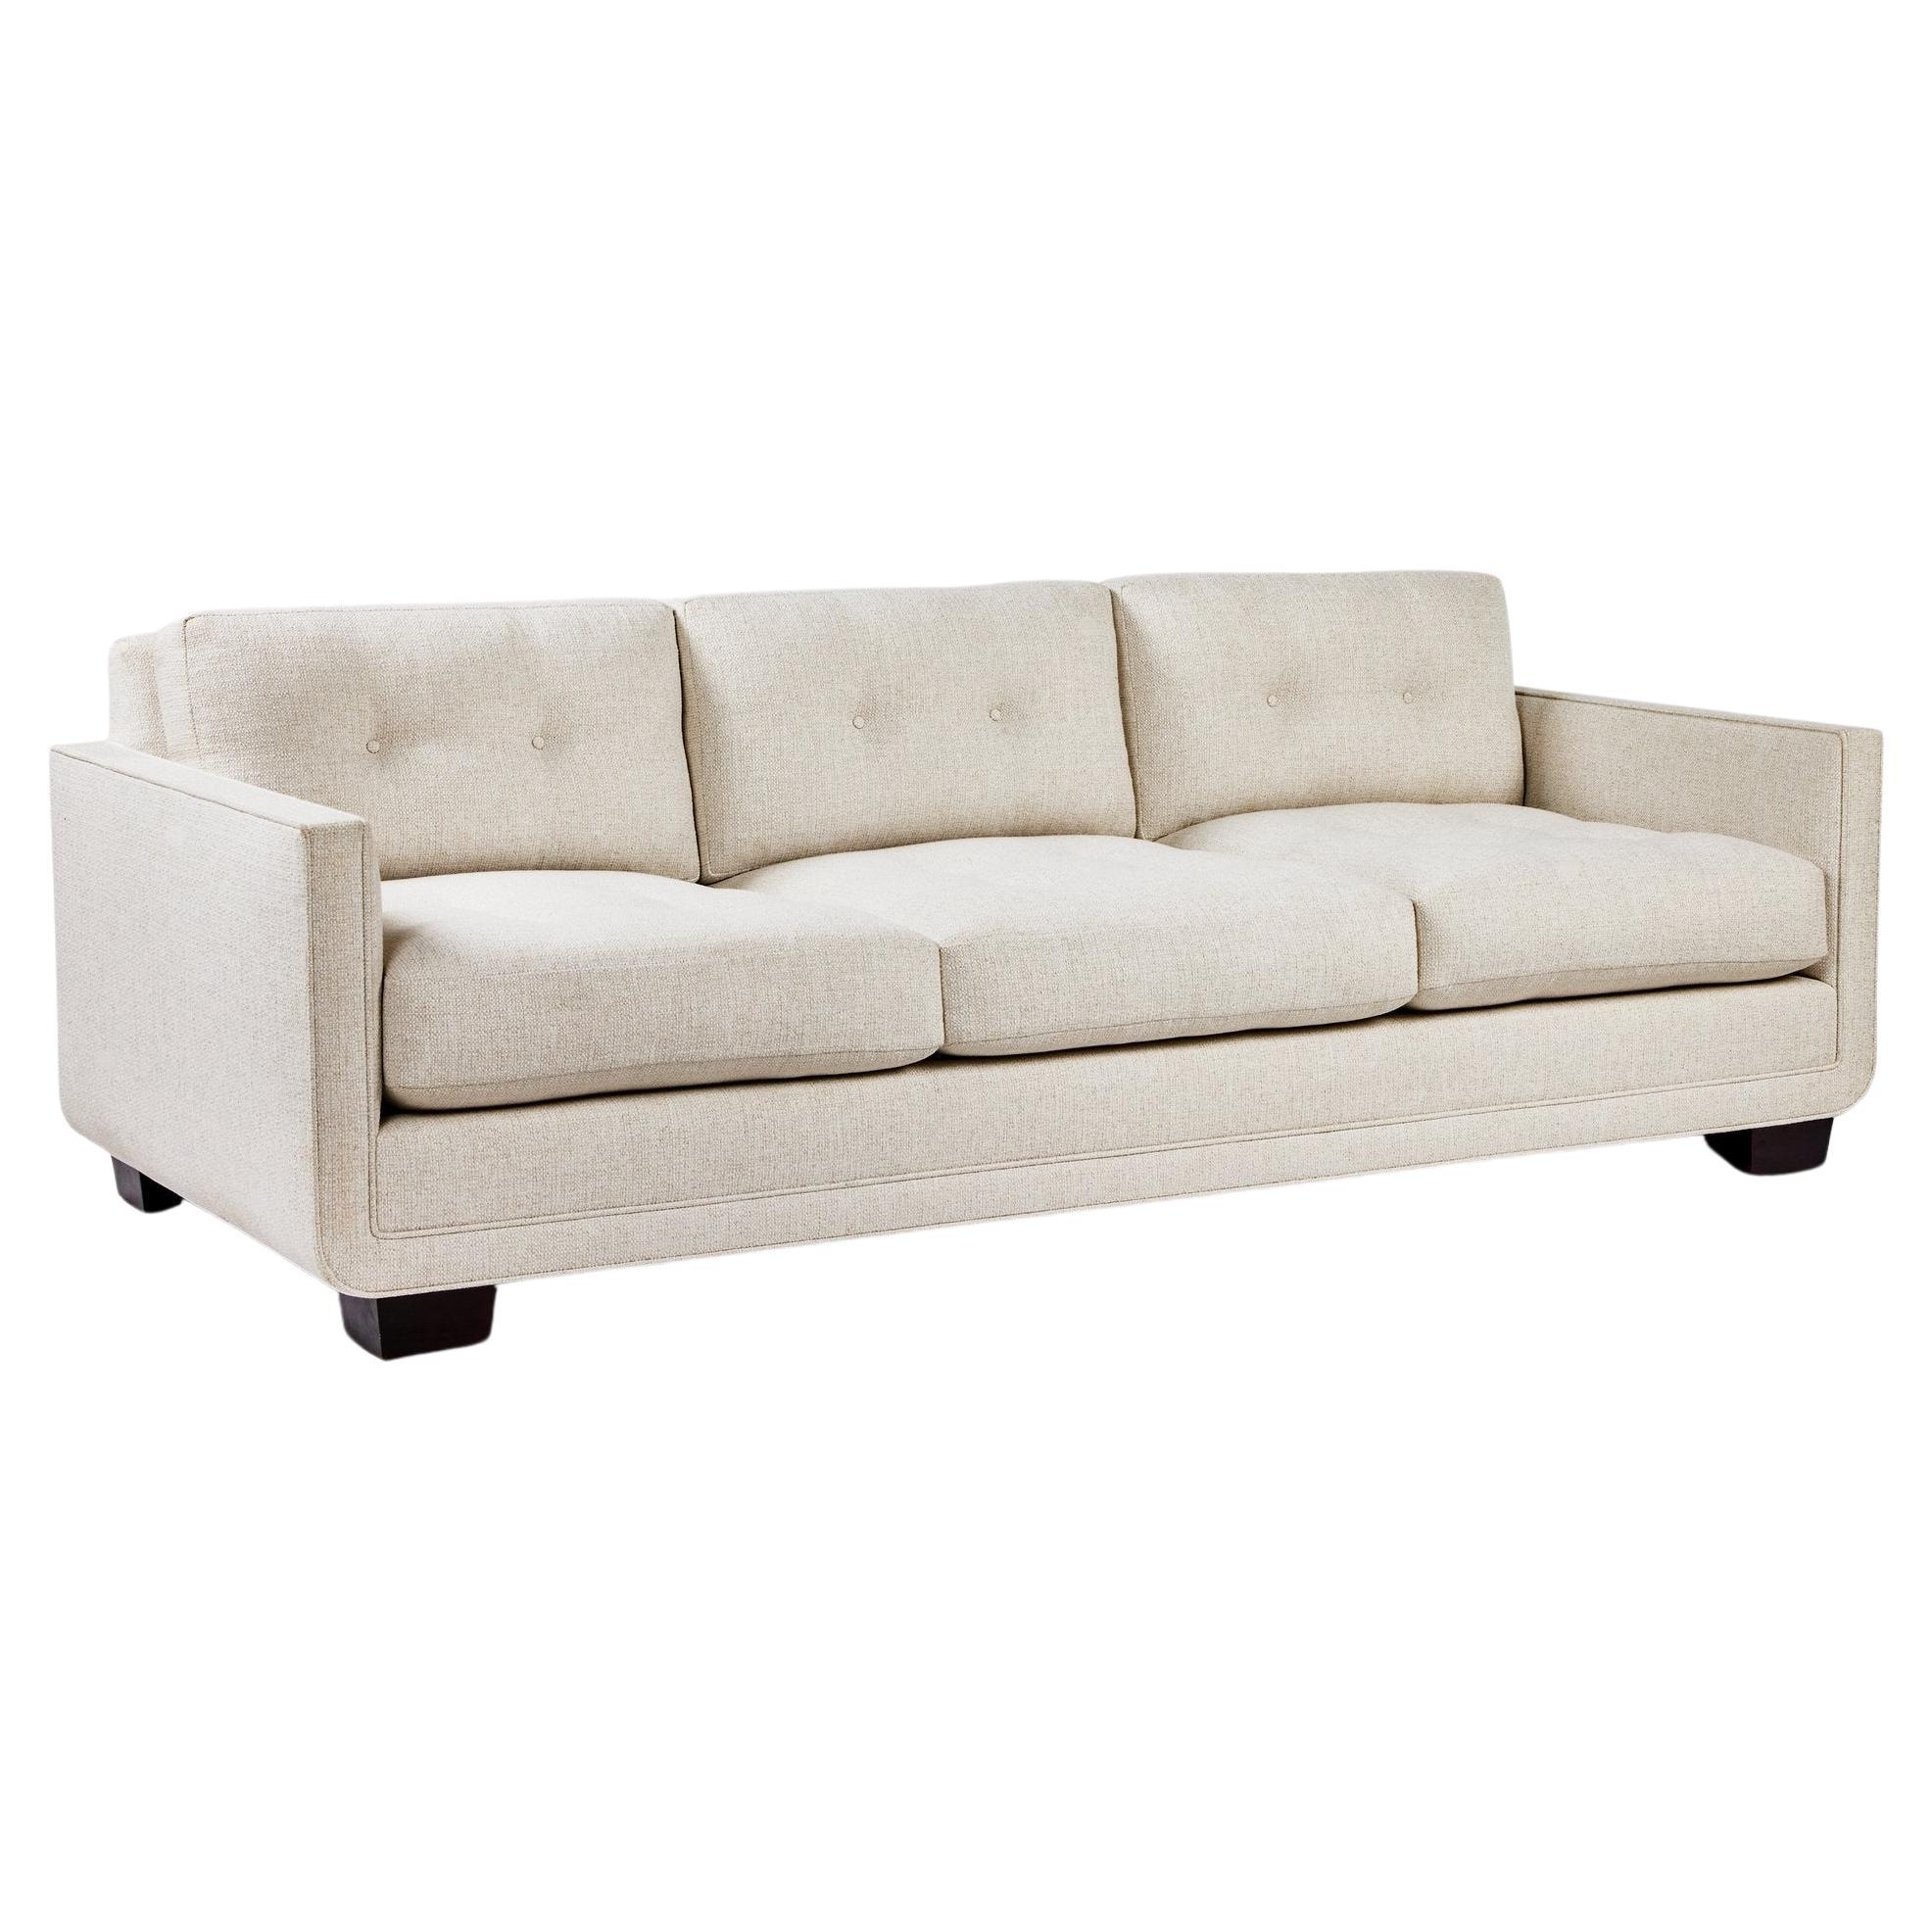 Modern Streamline Tufted Sofa with Curved Frame Detail by Martin & Brockett For Sale